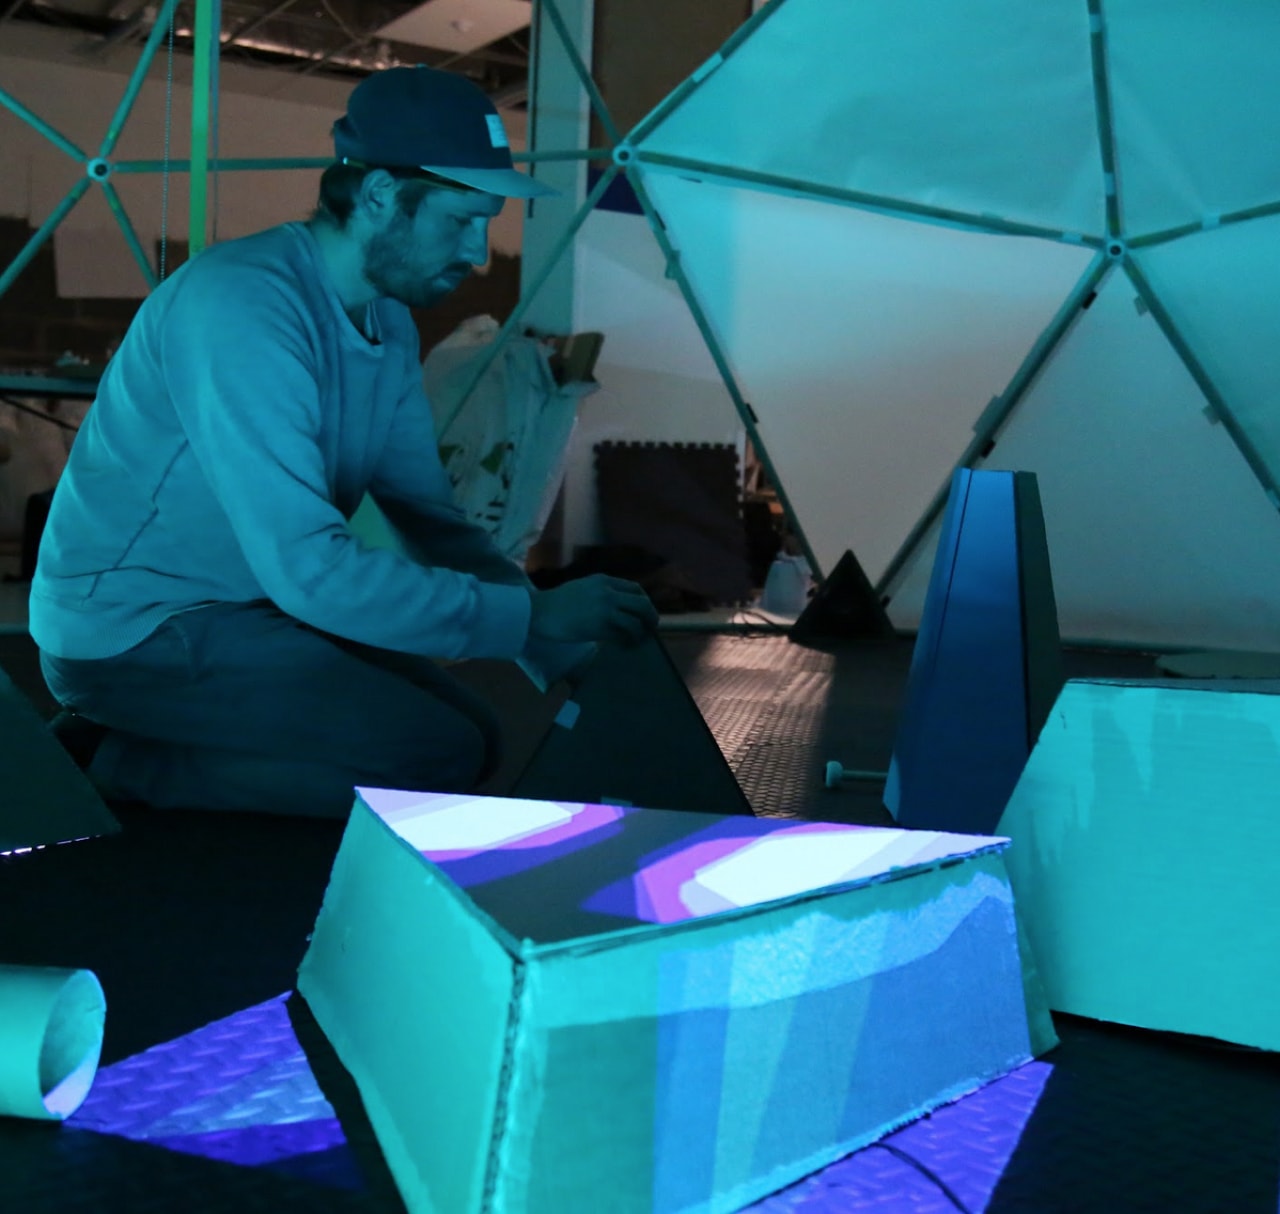 A man folds together an instrument inside a geometric dome lit with a blue lighting